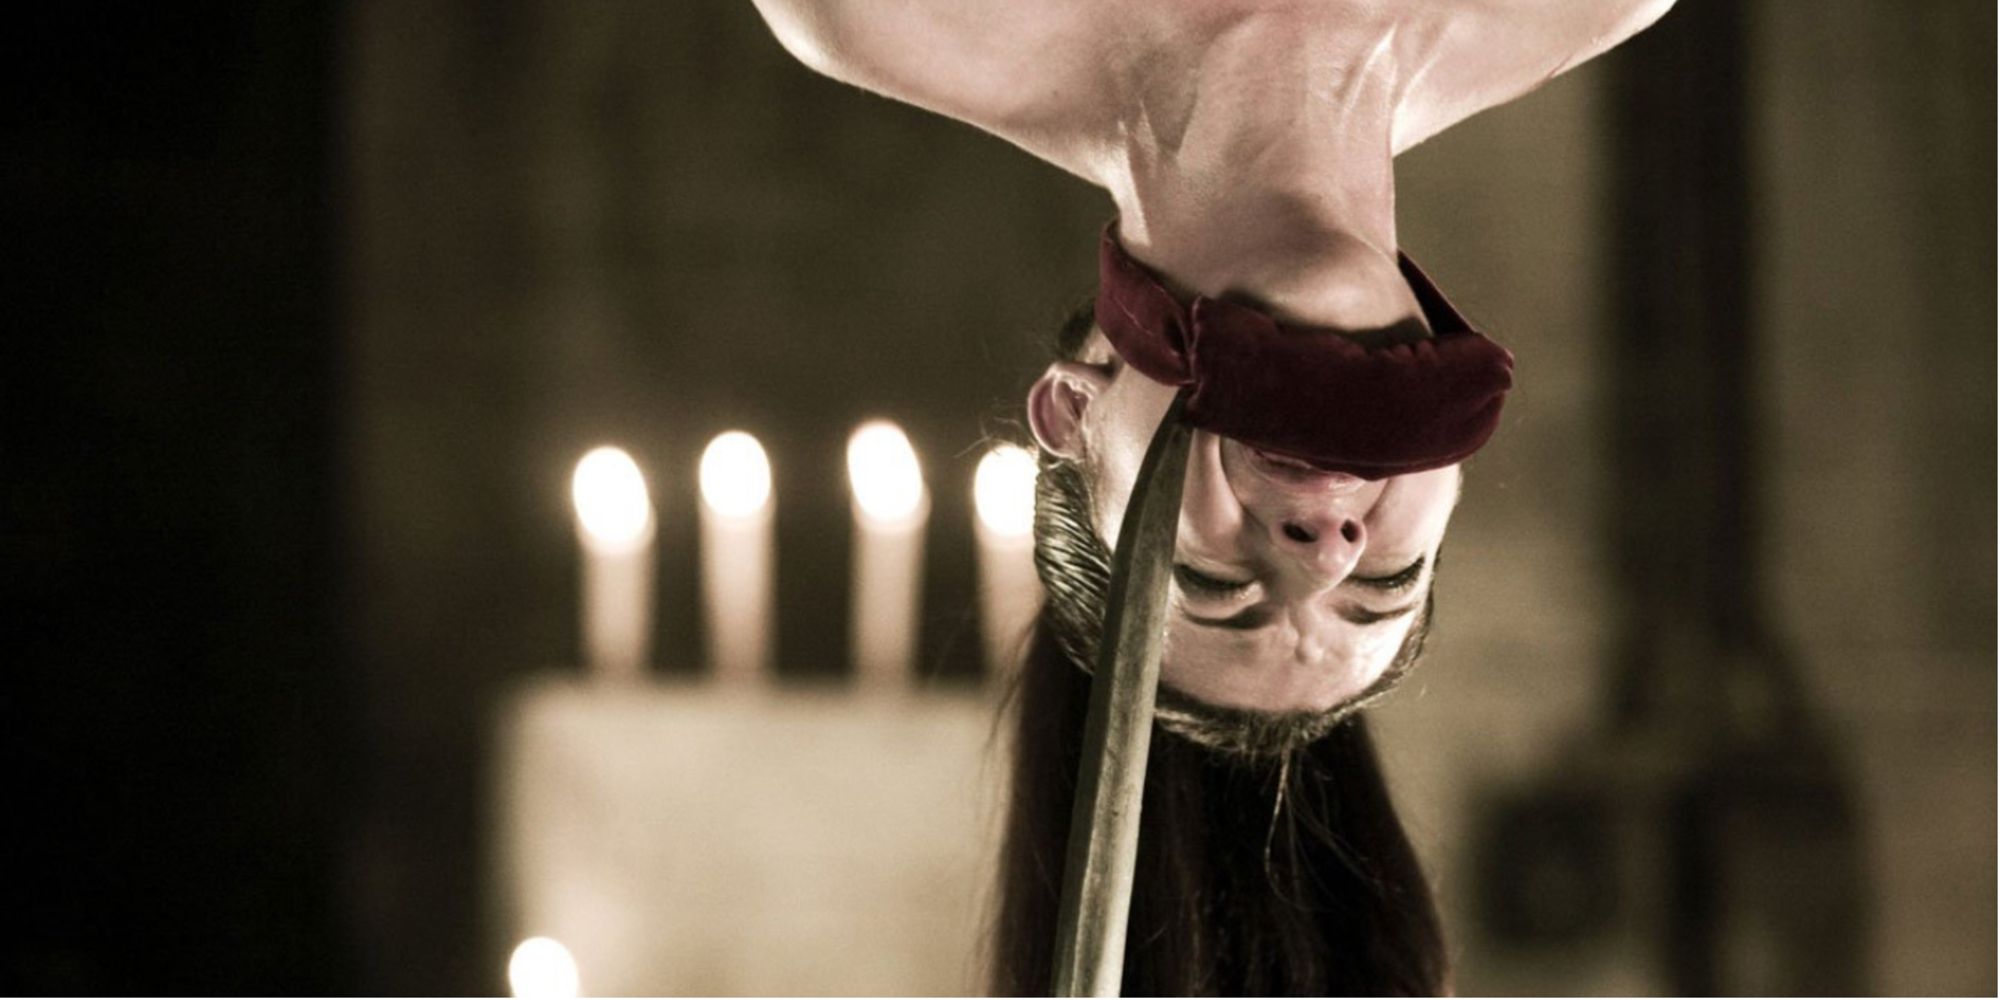 Heather Matarazzo hangs upside down while gagged, a scythe near her face in Hostel Part II